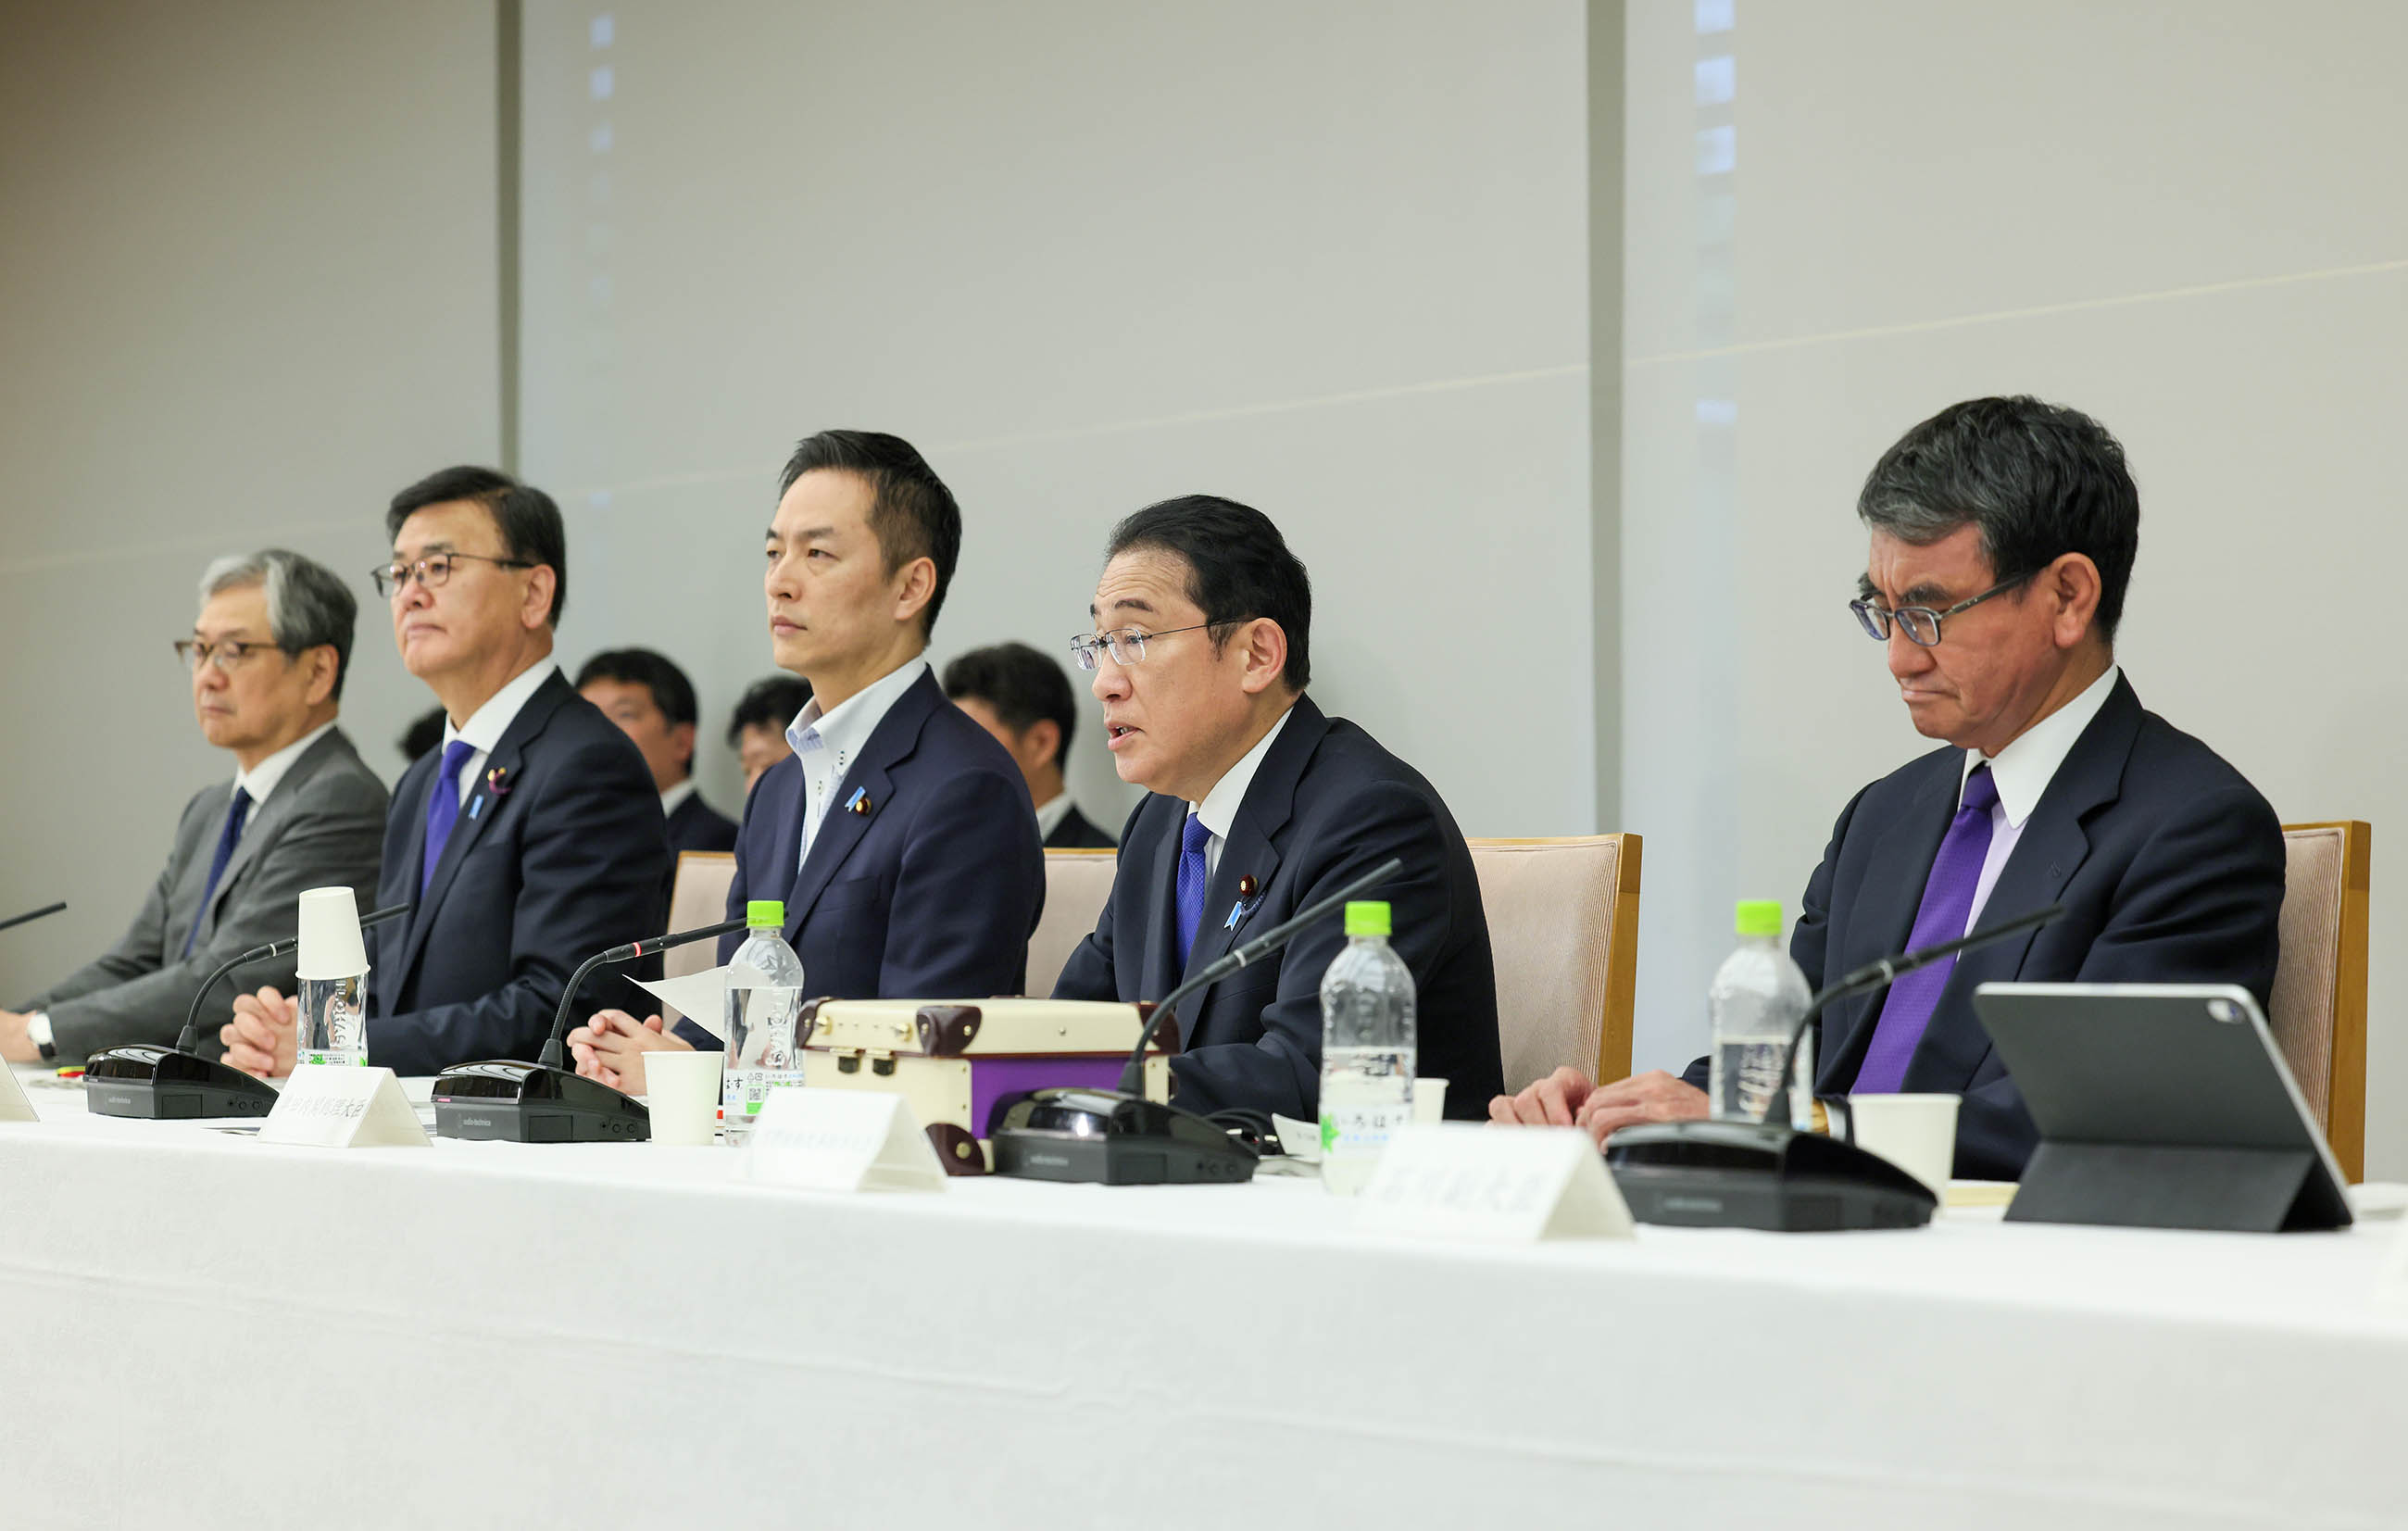 Council for Promotion of Regulatory Reform